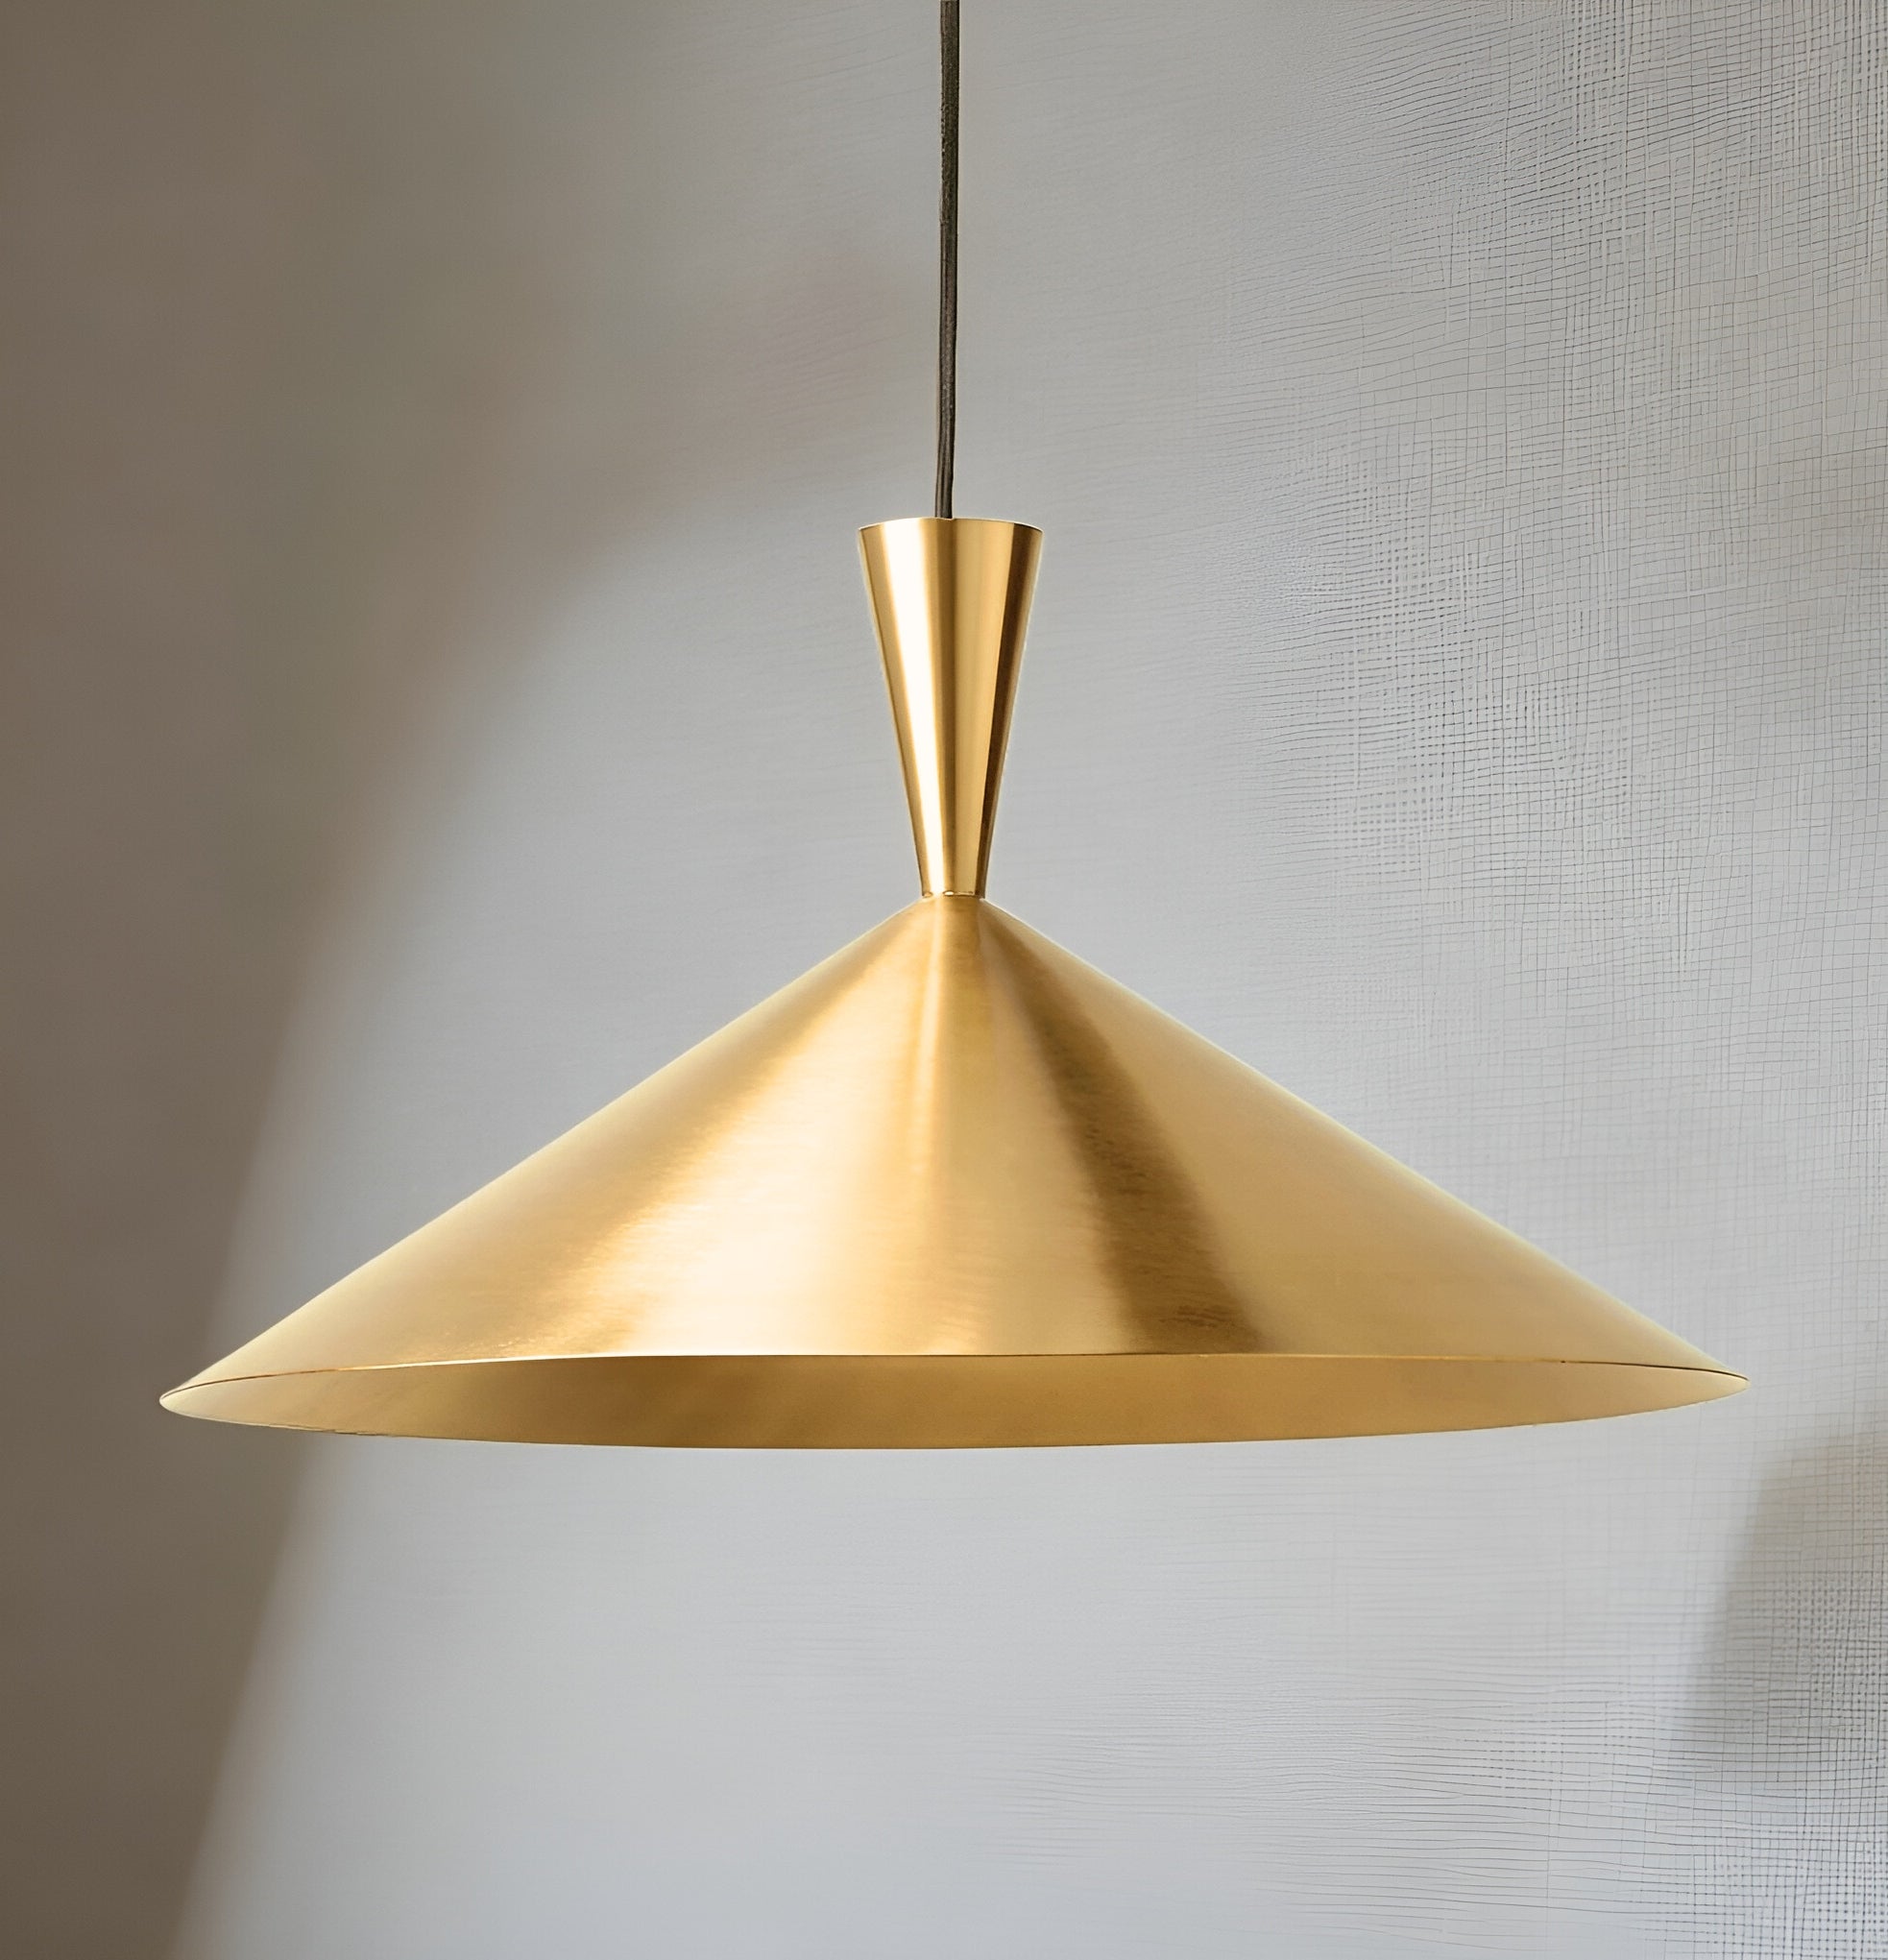 Polished Brass Cone Pendant Light, Hanging Ceiling Lamp.